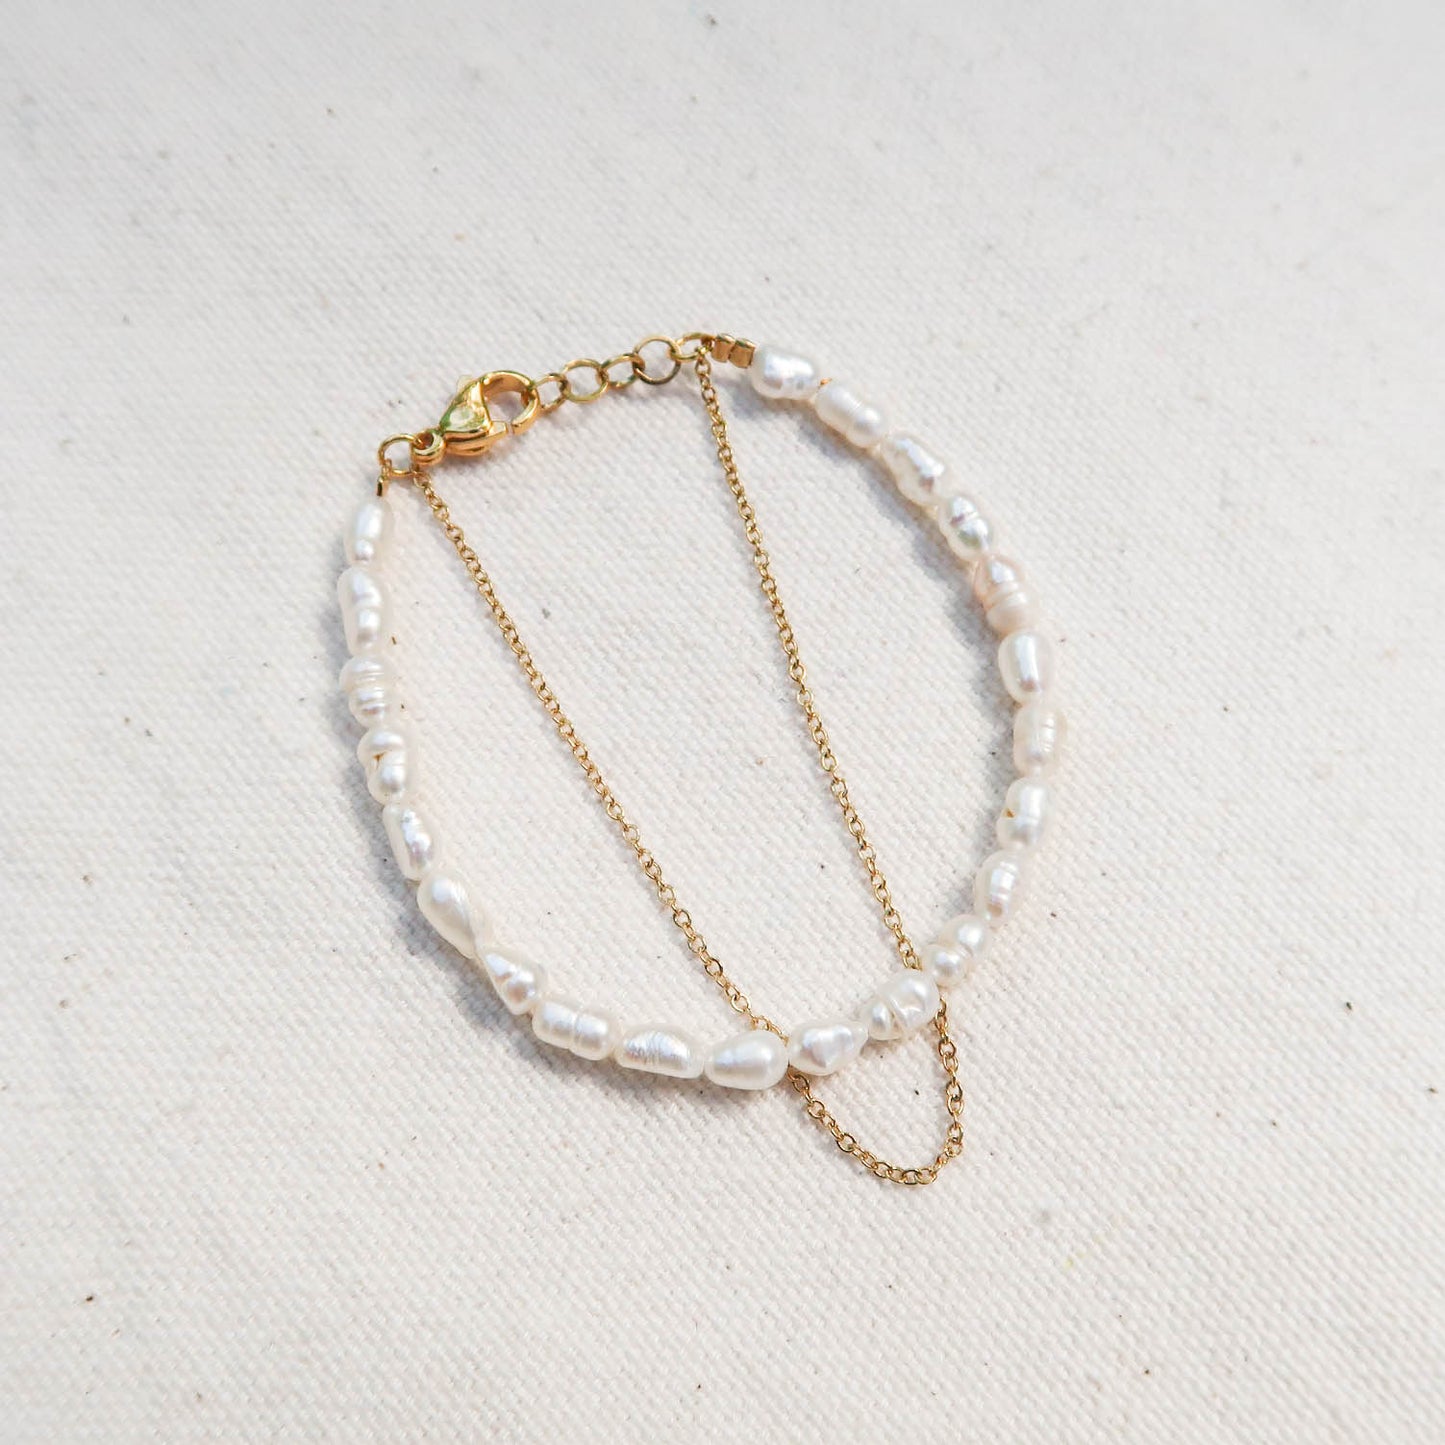 Rice Pearl Bracelet with Chain